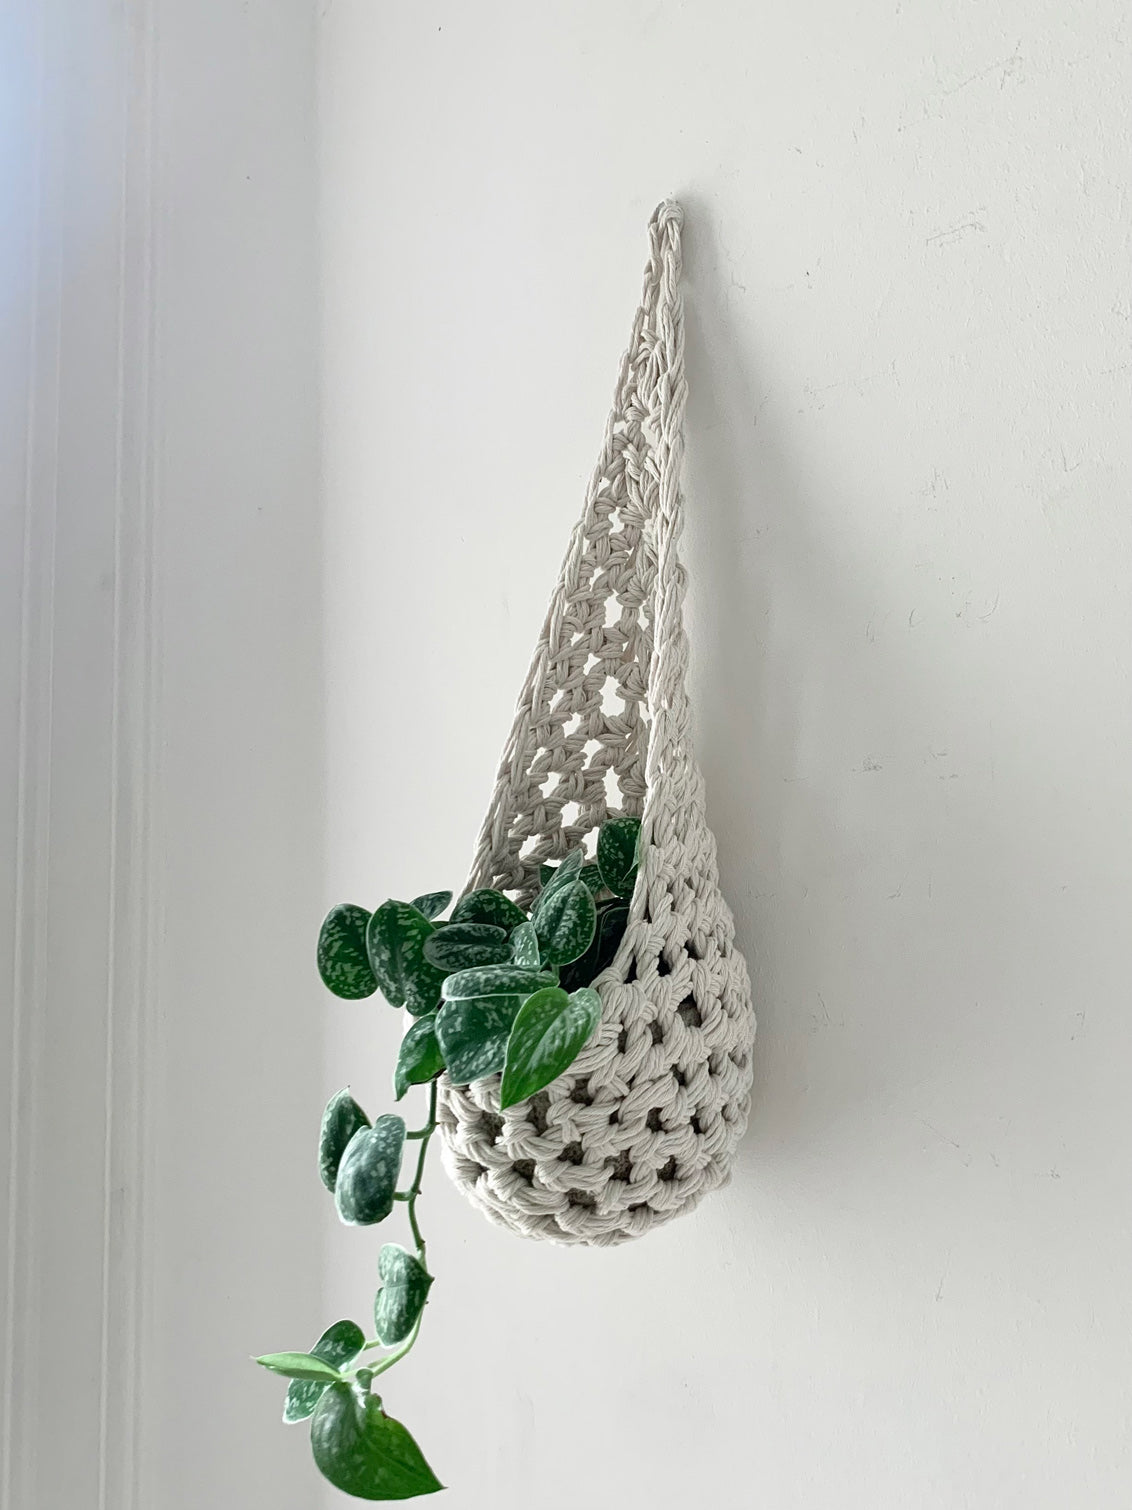 Image of single white cotton crochet hanging wall planter against a wall of a bedroom. The photo shows the planter with a pot and plant inside it, in order to demonstate tierdrop shape of design. Hanging by a small nail in the wall.